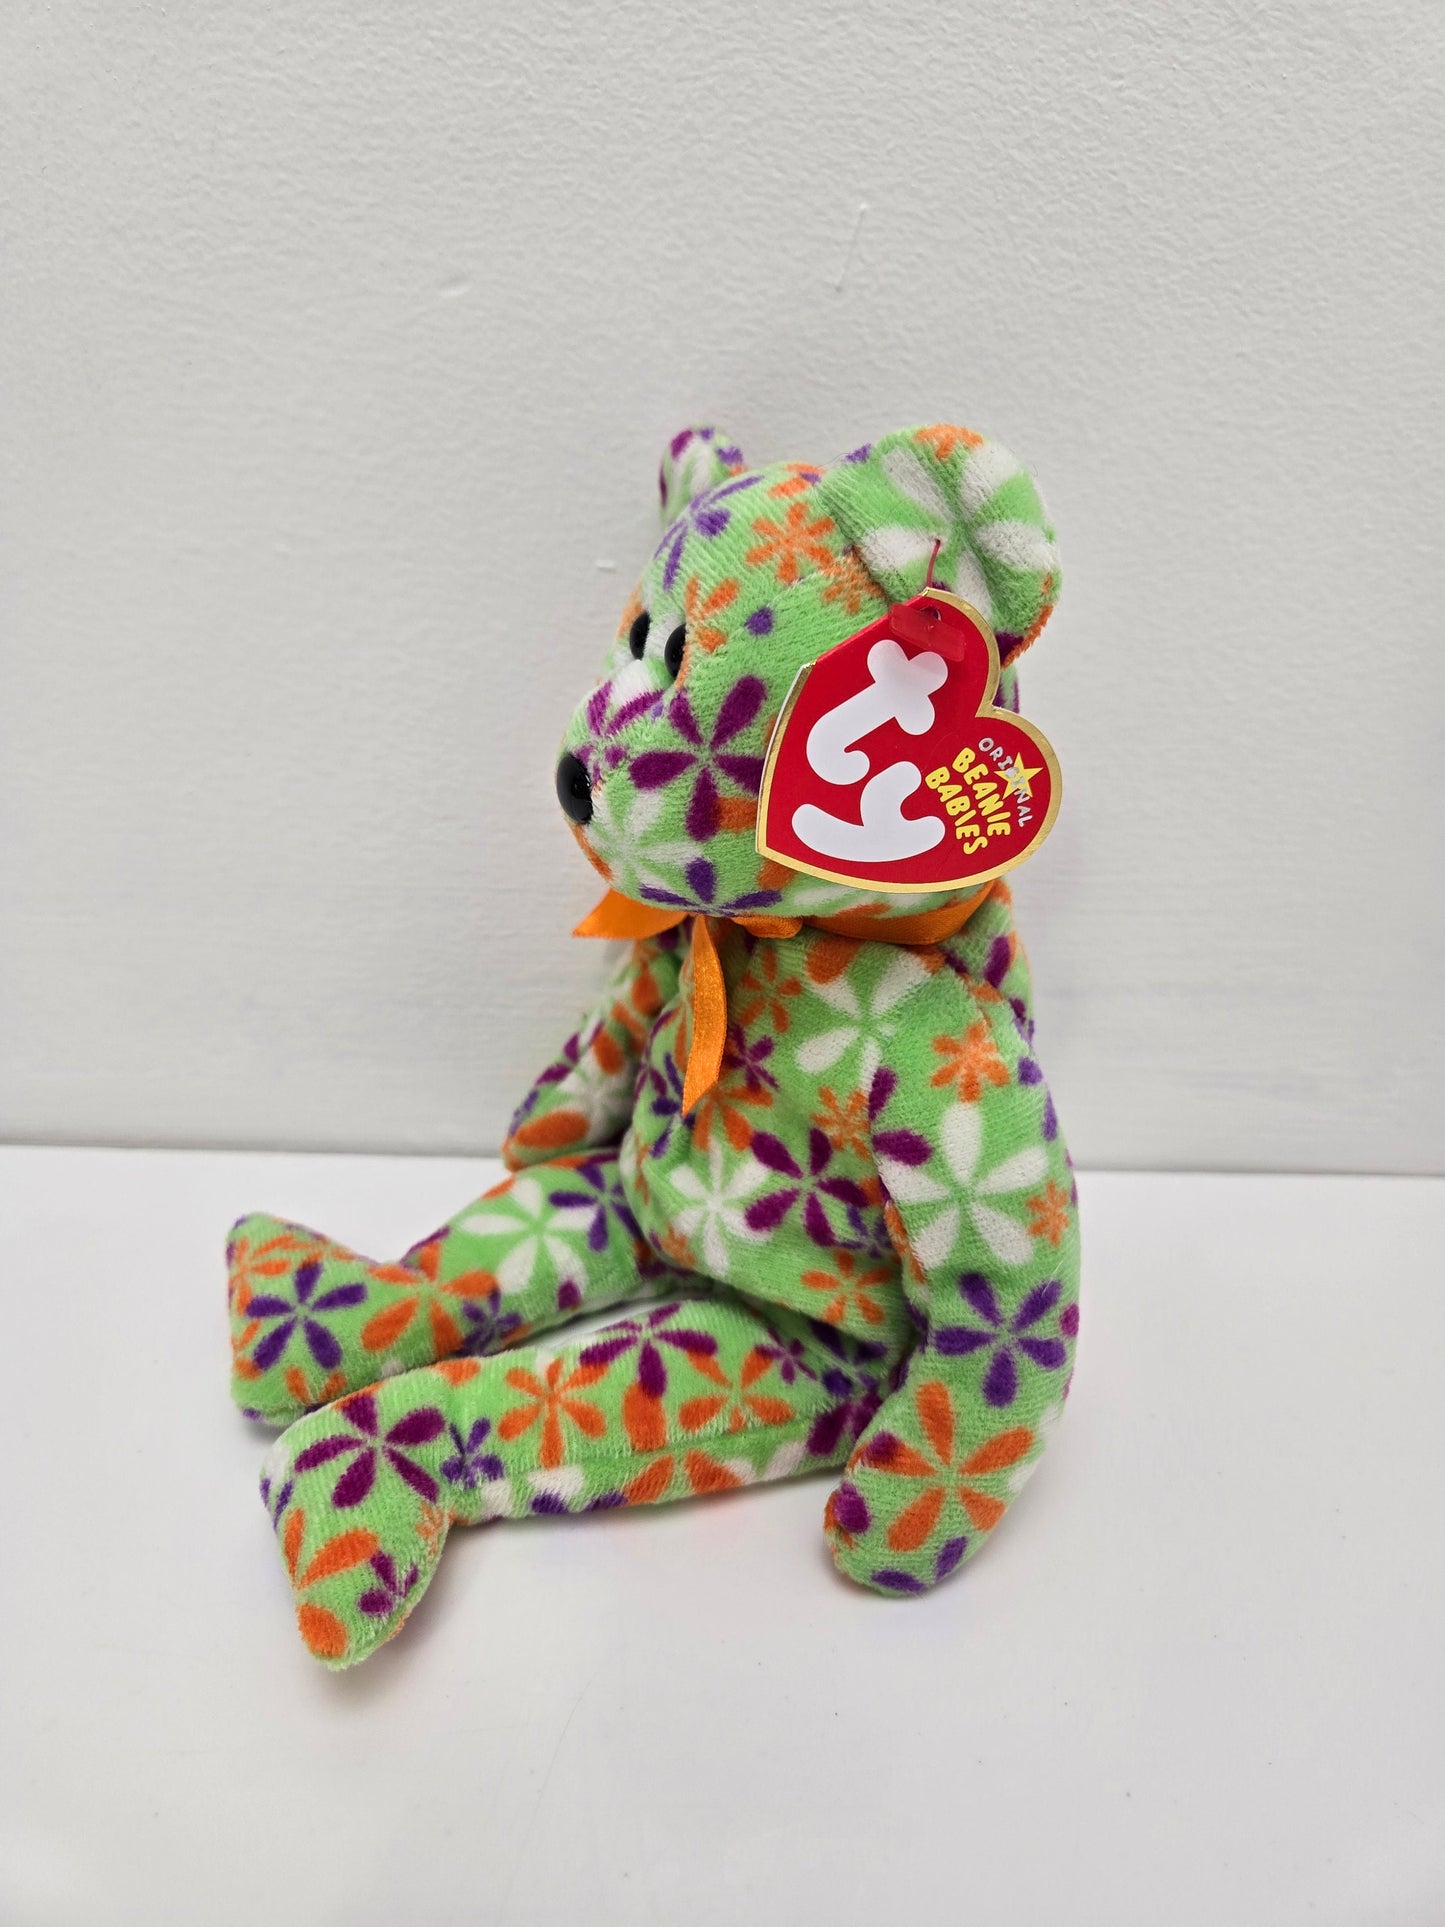 Ty Beanie Baby “Groovey” the Bear (8.5 inch)